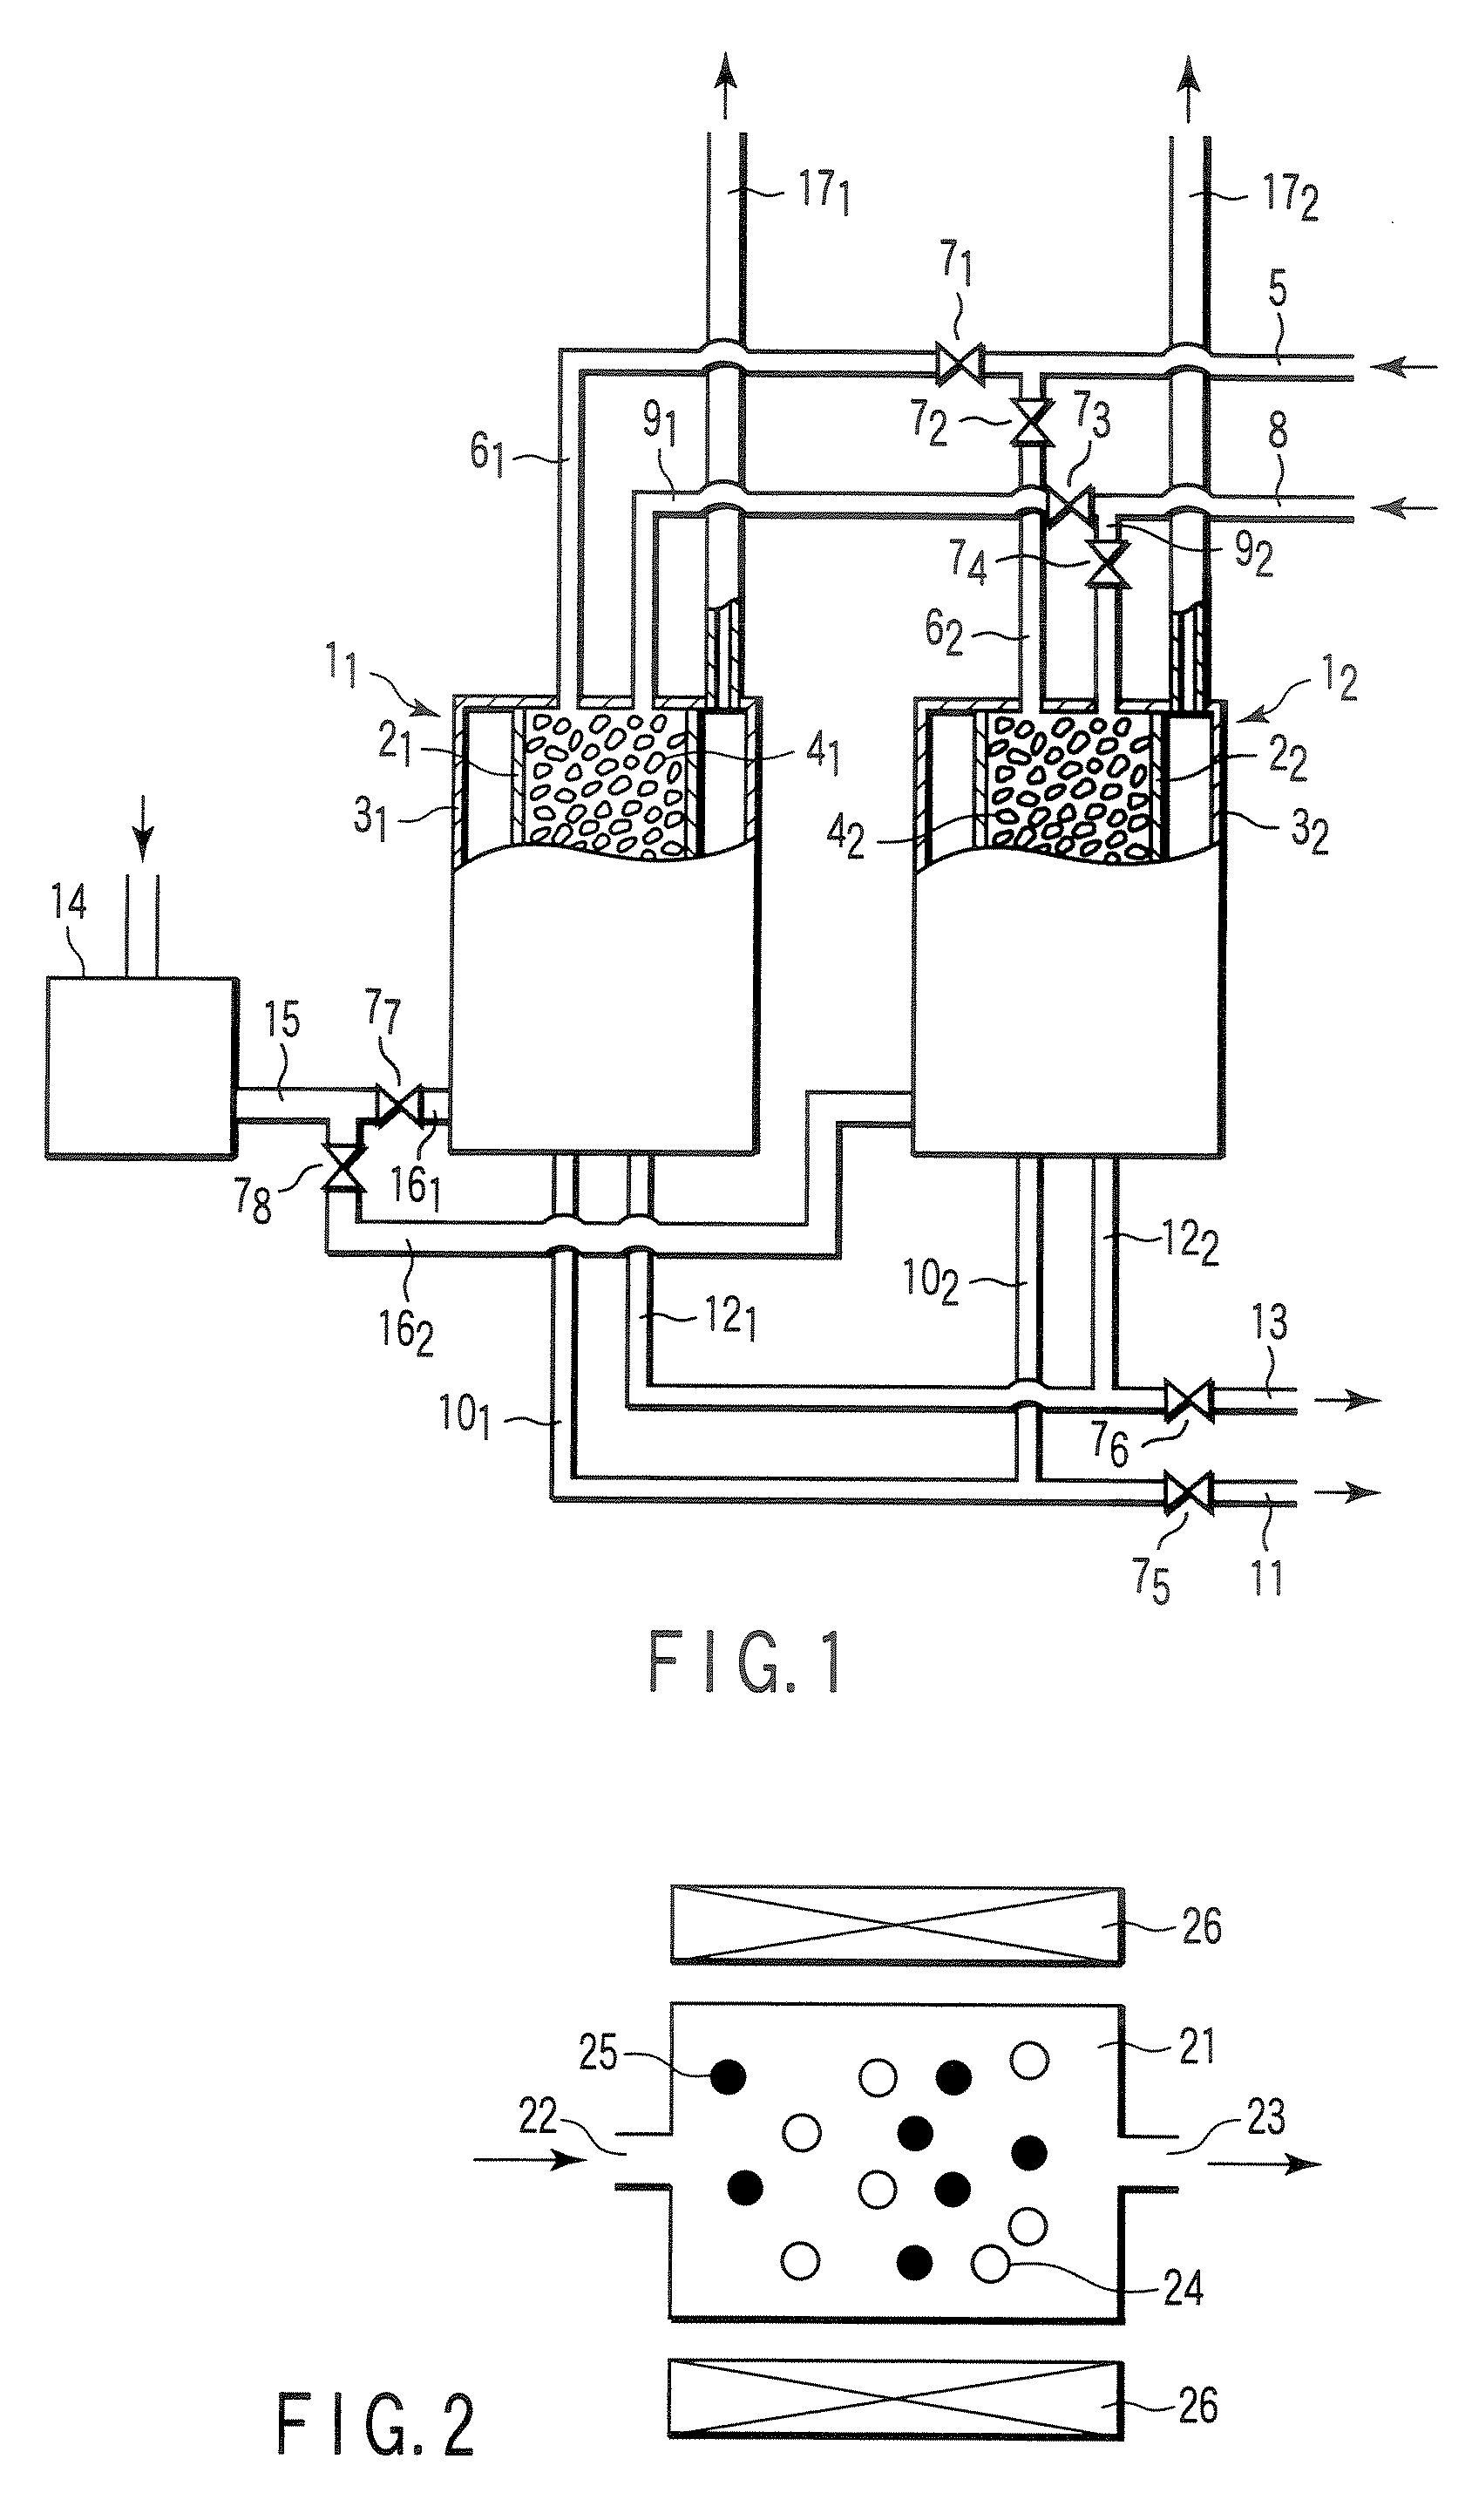 Carbon dioxide absorbent, carbon dioxide separating apparatus, and reformer